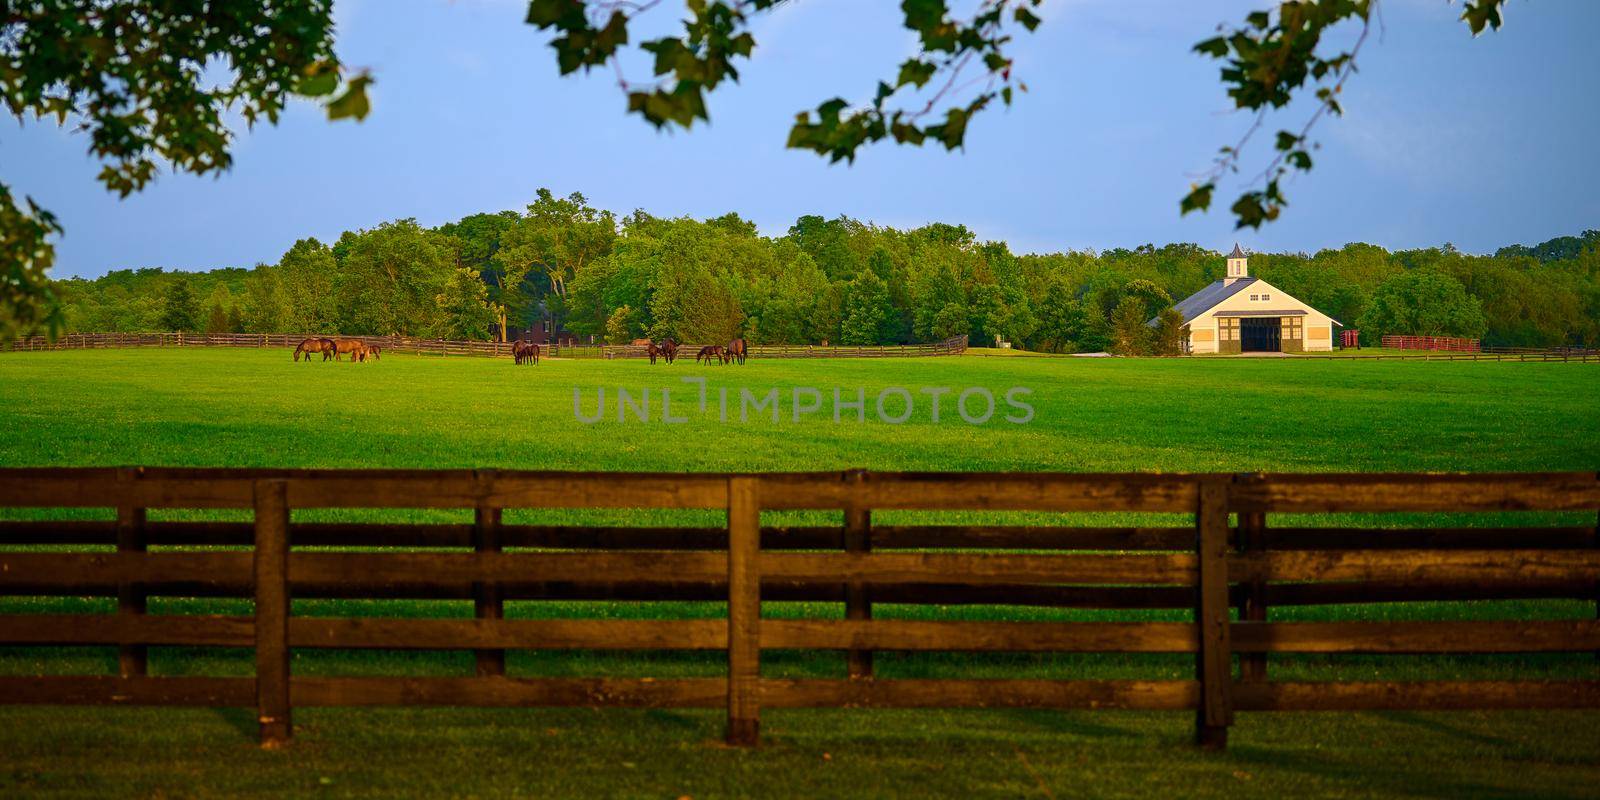 Thoroughbred horses grazing in a field with horse barn.